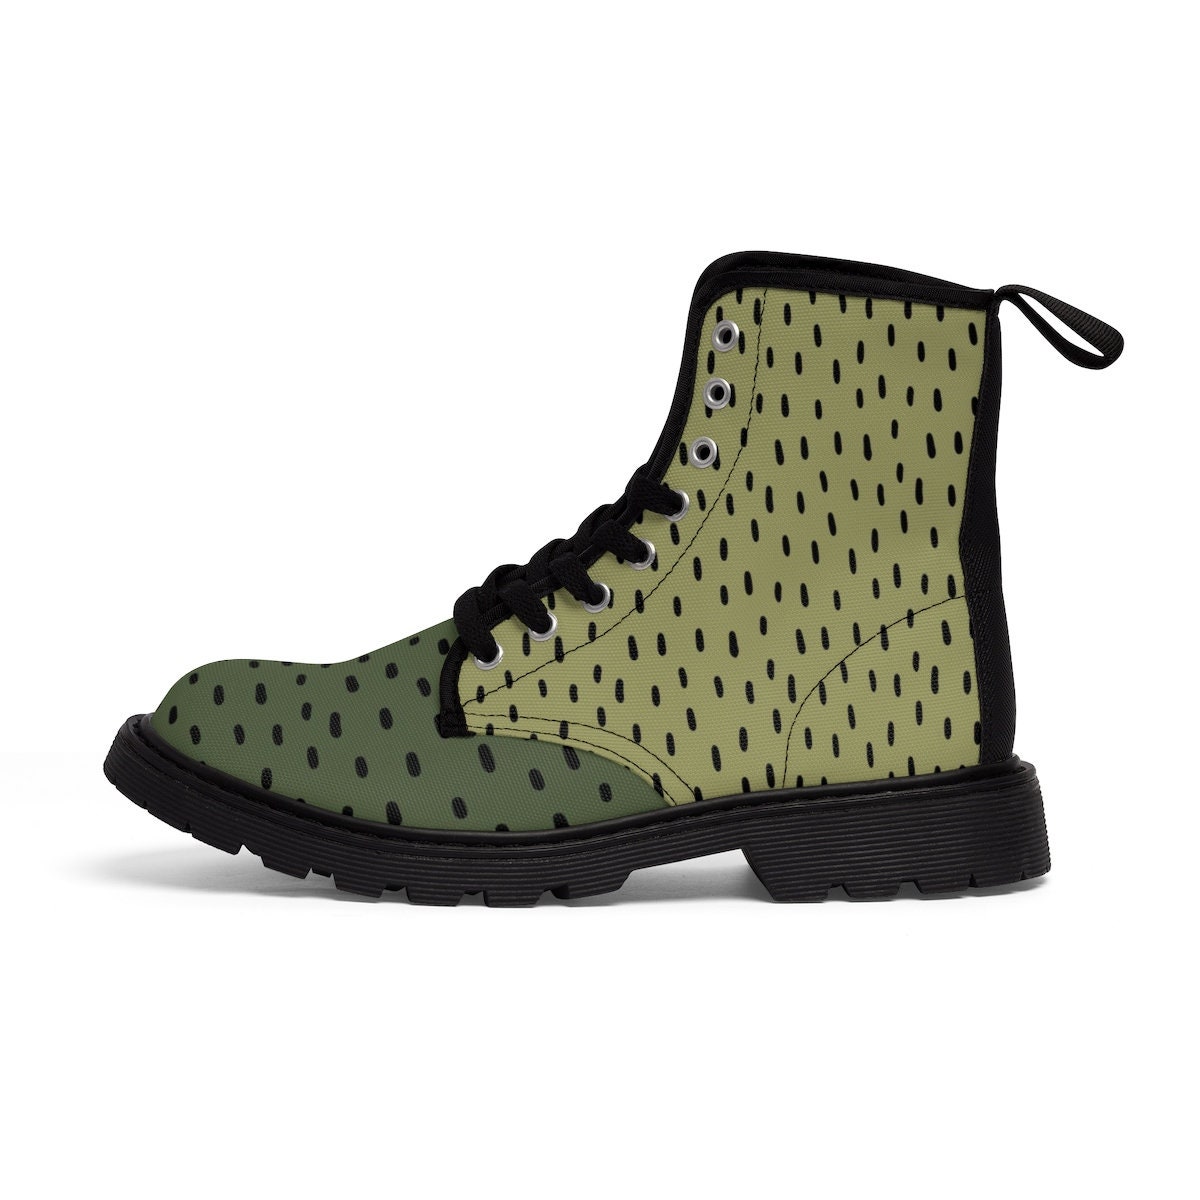 Streetwear Shoes Burning Man Boots Man High Shoes Military - Etsy